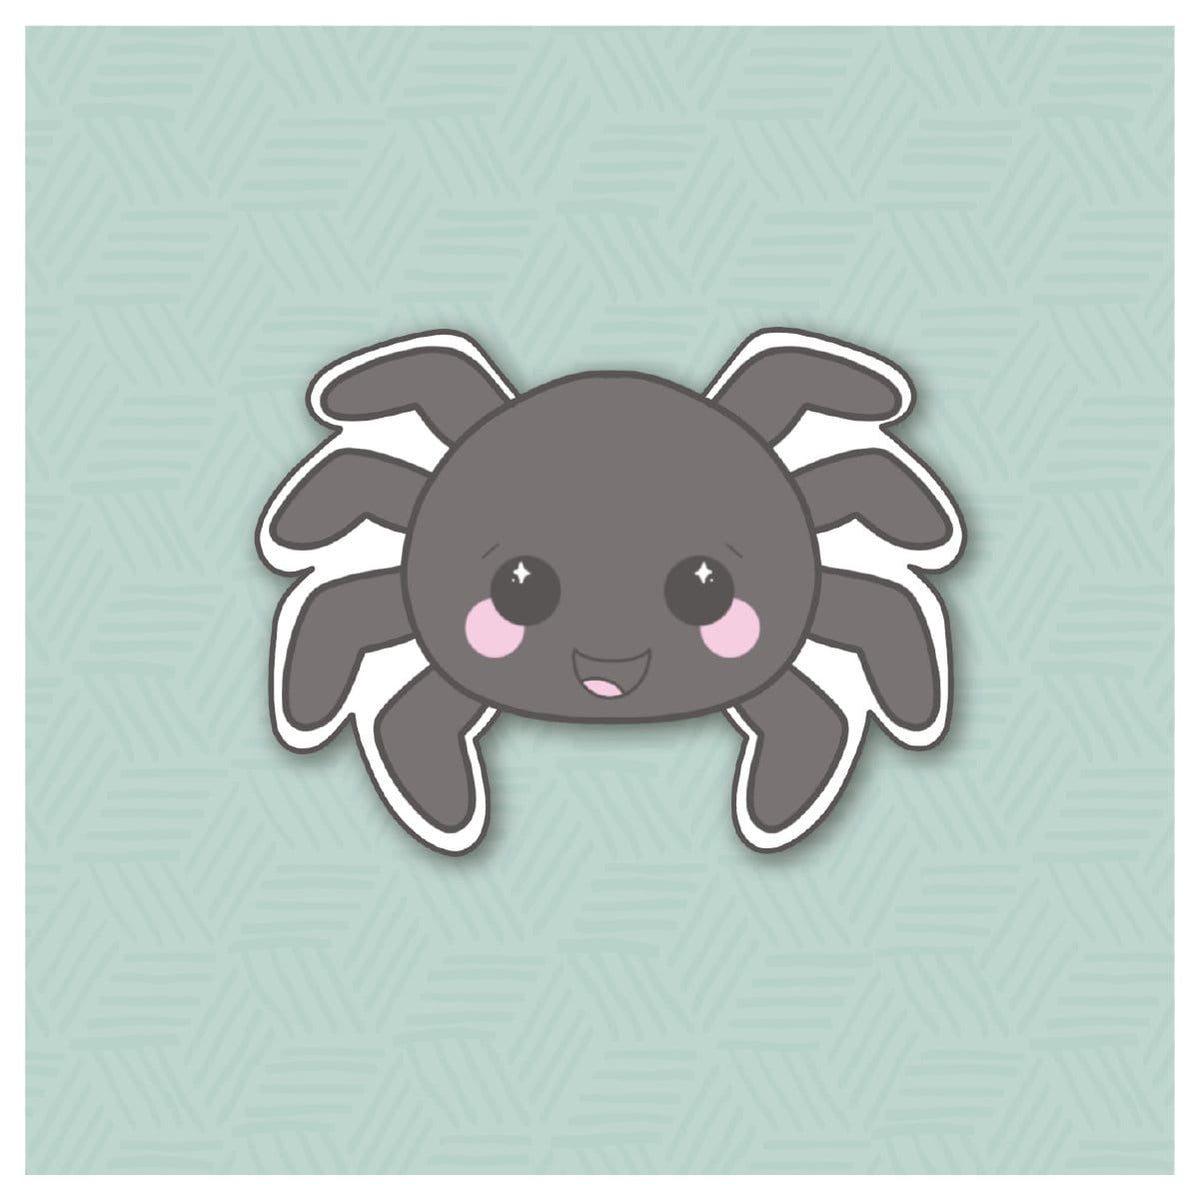 Chunky Spider Cookie Cutter